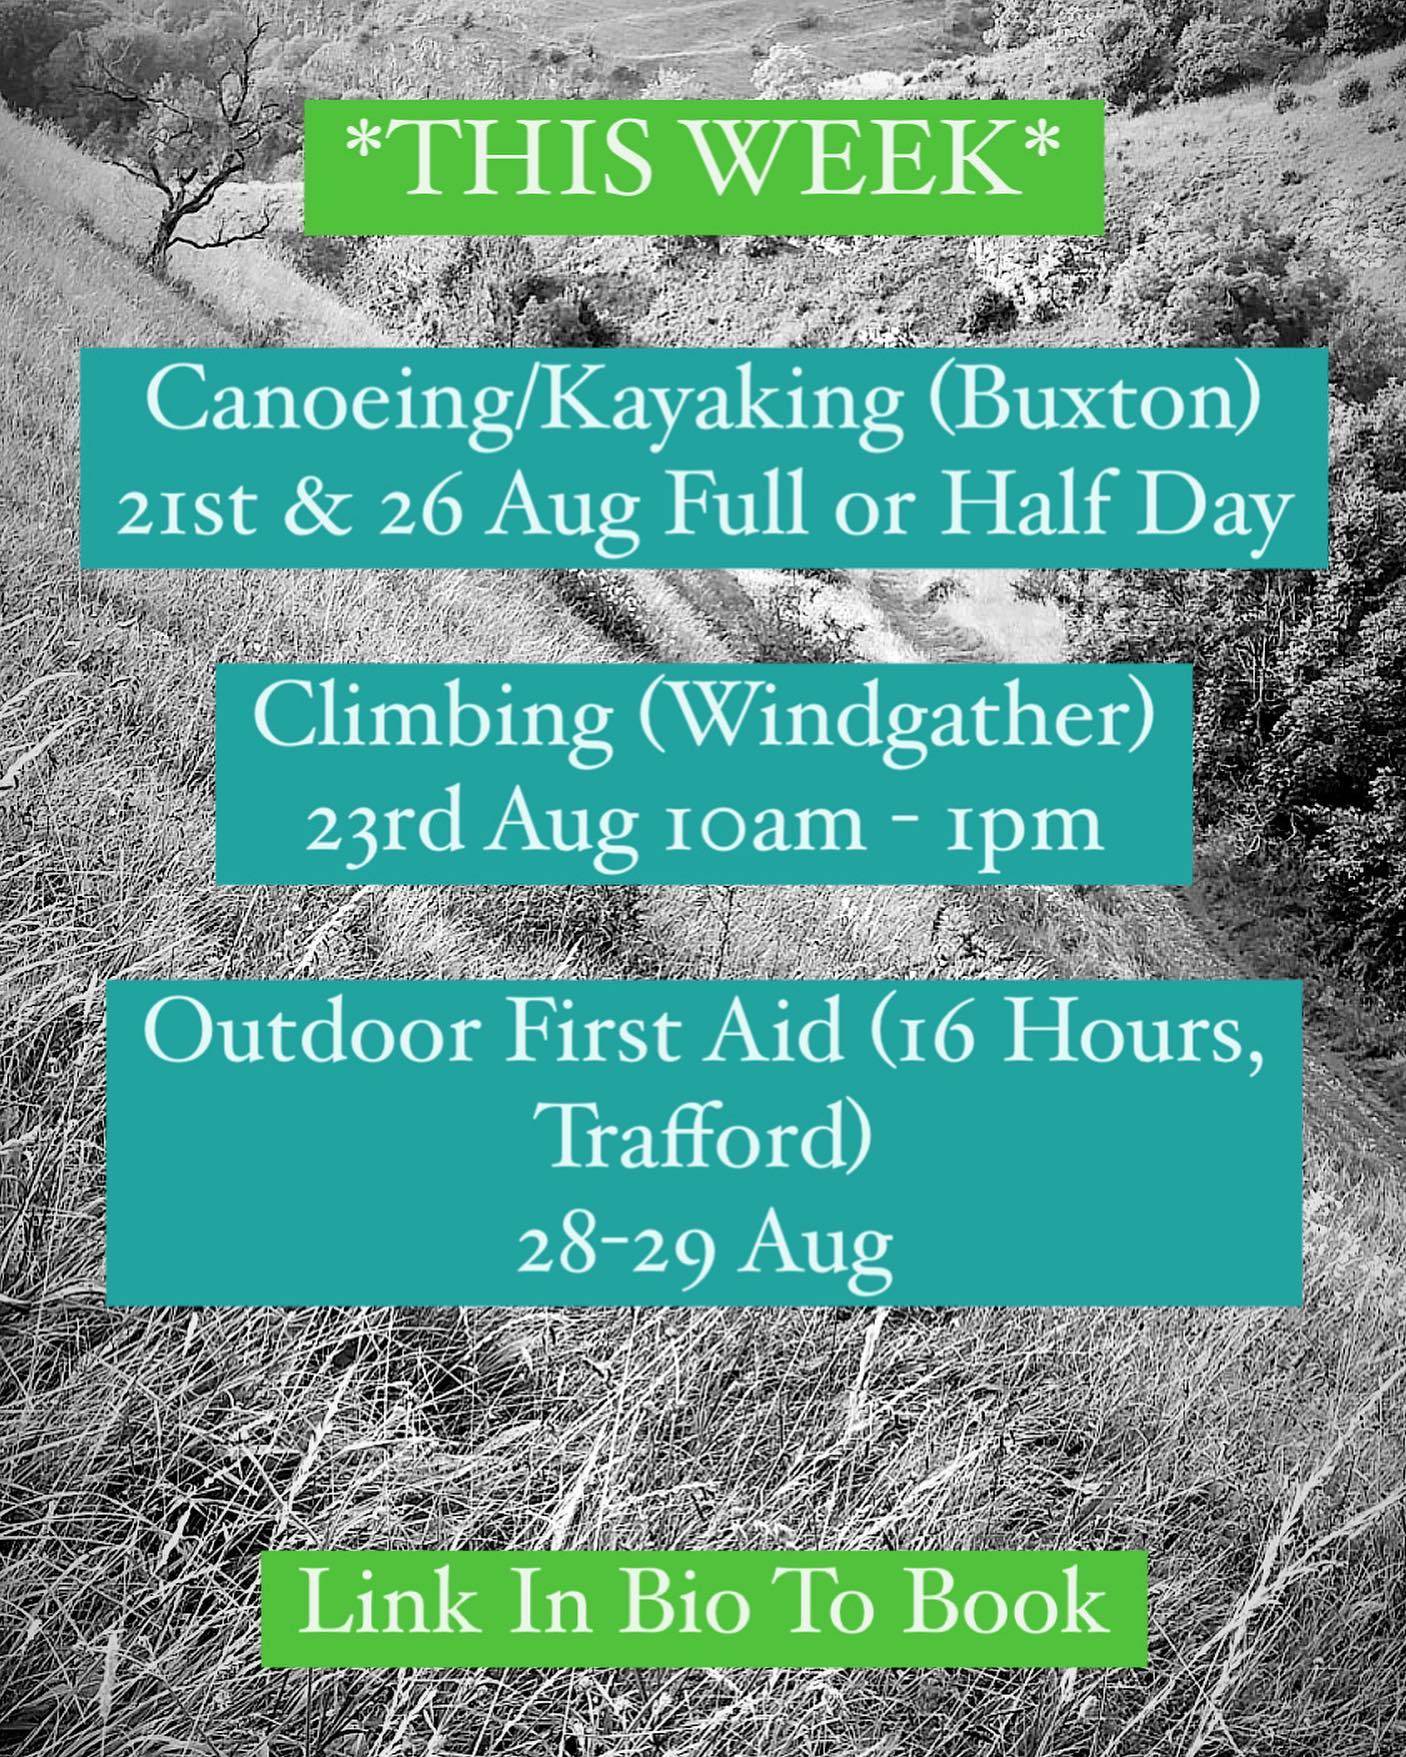 Join our friendly, qualified instructors for these sessions, just for fun or to learn some new skills, we hope to see you here!

More info and booking at www.wilderness-development.com, link in our bio 🧗‍♀️⛰🧗‍♀️
.
.
.
#wildernessdevelopment #smallbusiness #rockclimbing #climbing #scrambling #canoeing #kayaking #outdoorfirstaid #abseiling #trysomethingnew #peakdistrict #peakdistrictnationalpark #peakdistrictclimbing #mountainsfellsandhikes #roamtheuk #outdoorpursuits #outdooradventures #outdooractivities #nationalparksuk #booknow